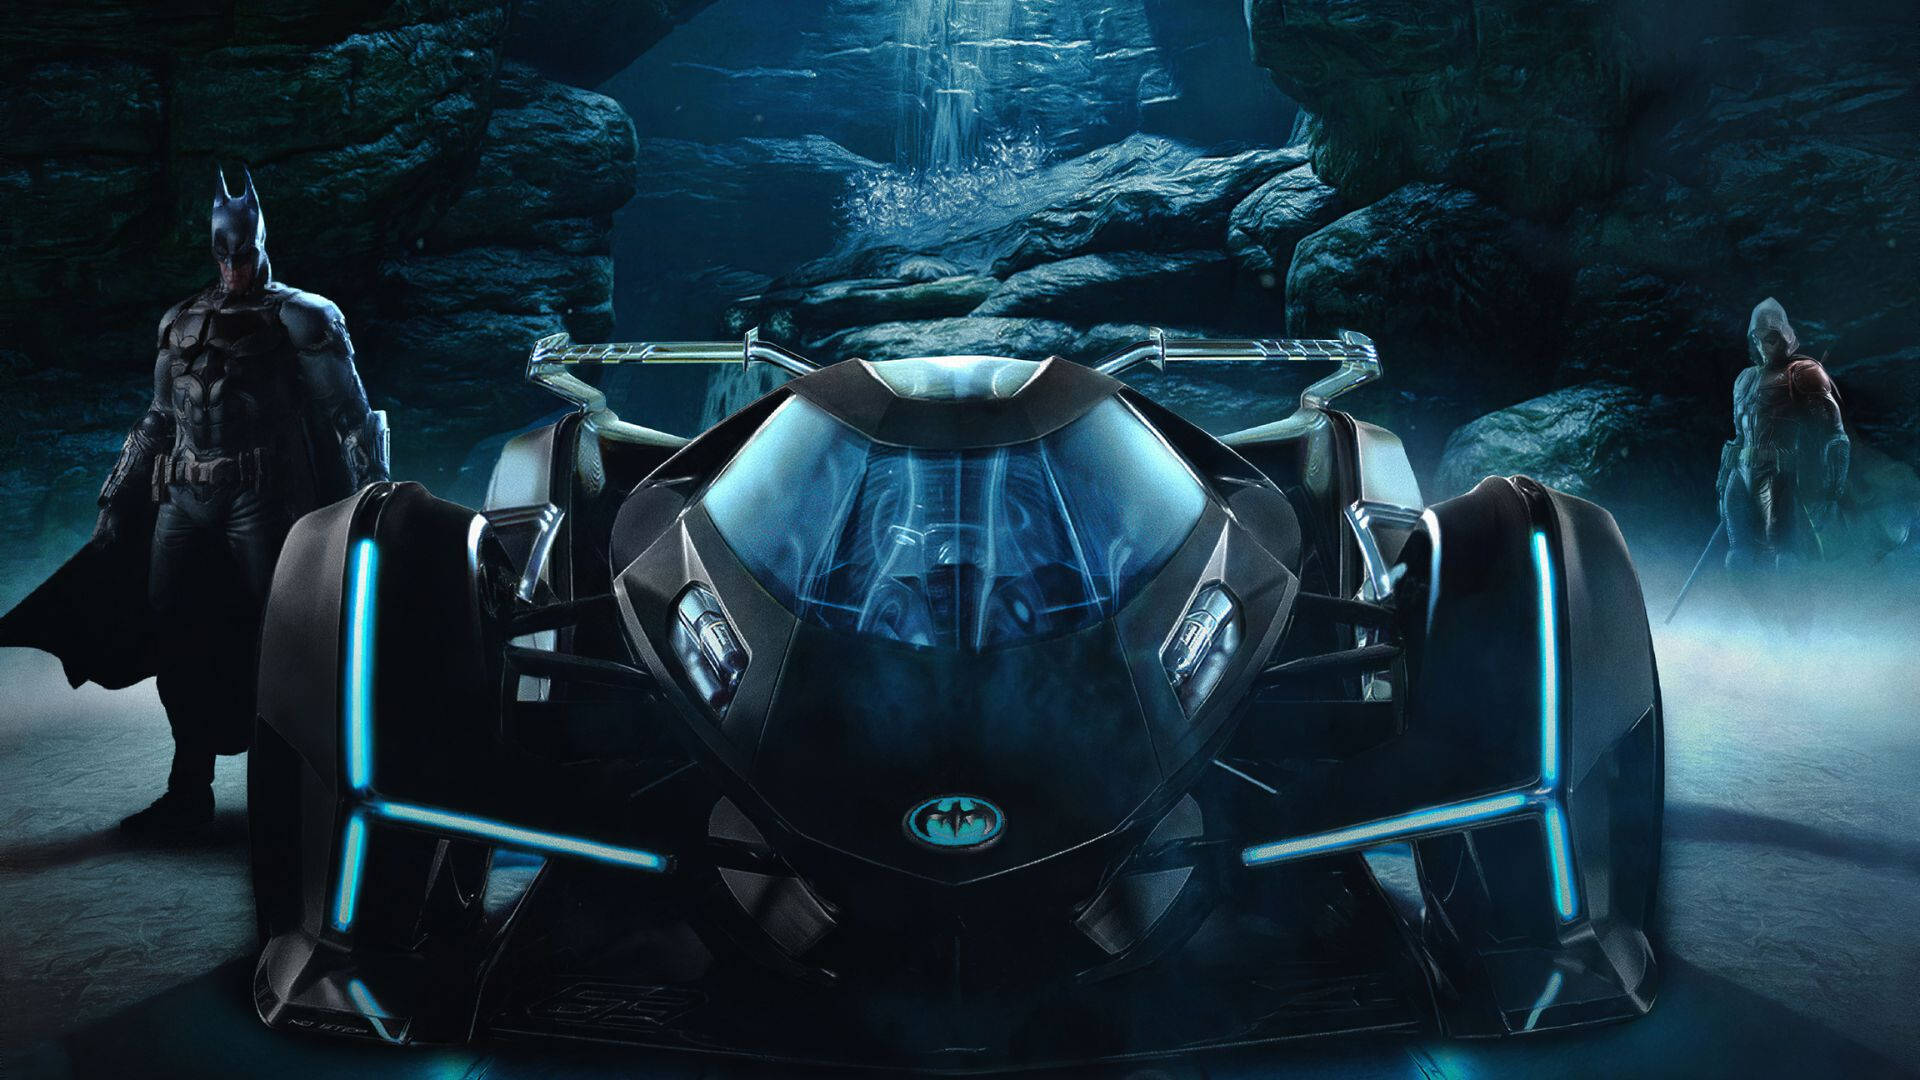 Batmobile In The Cave Background